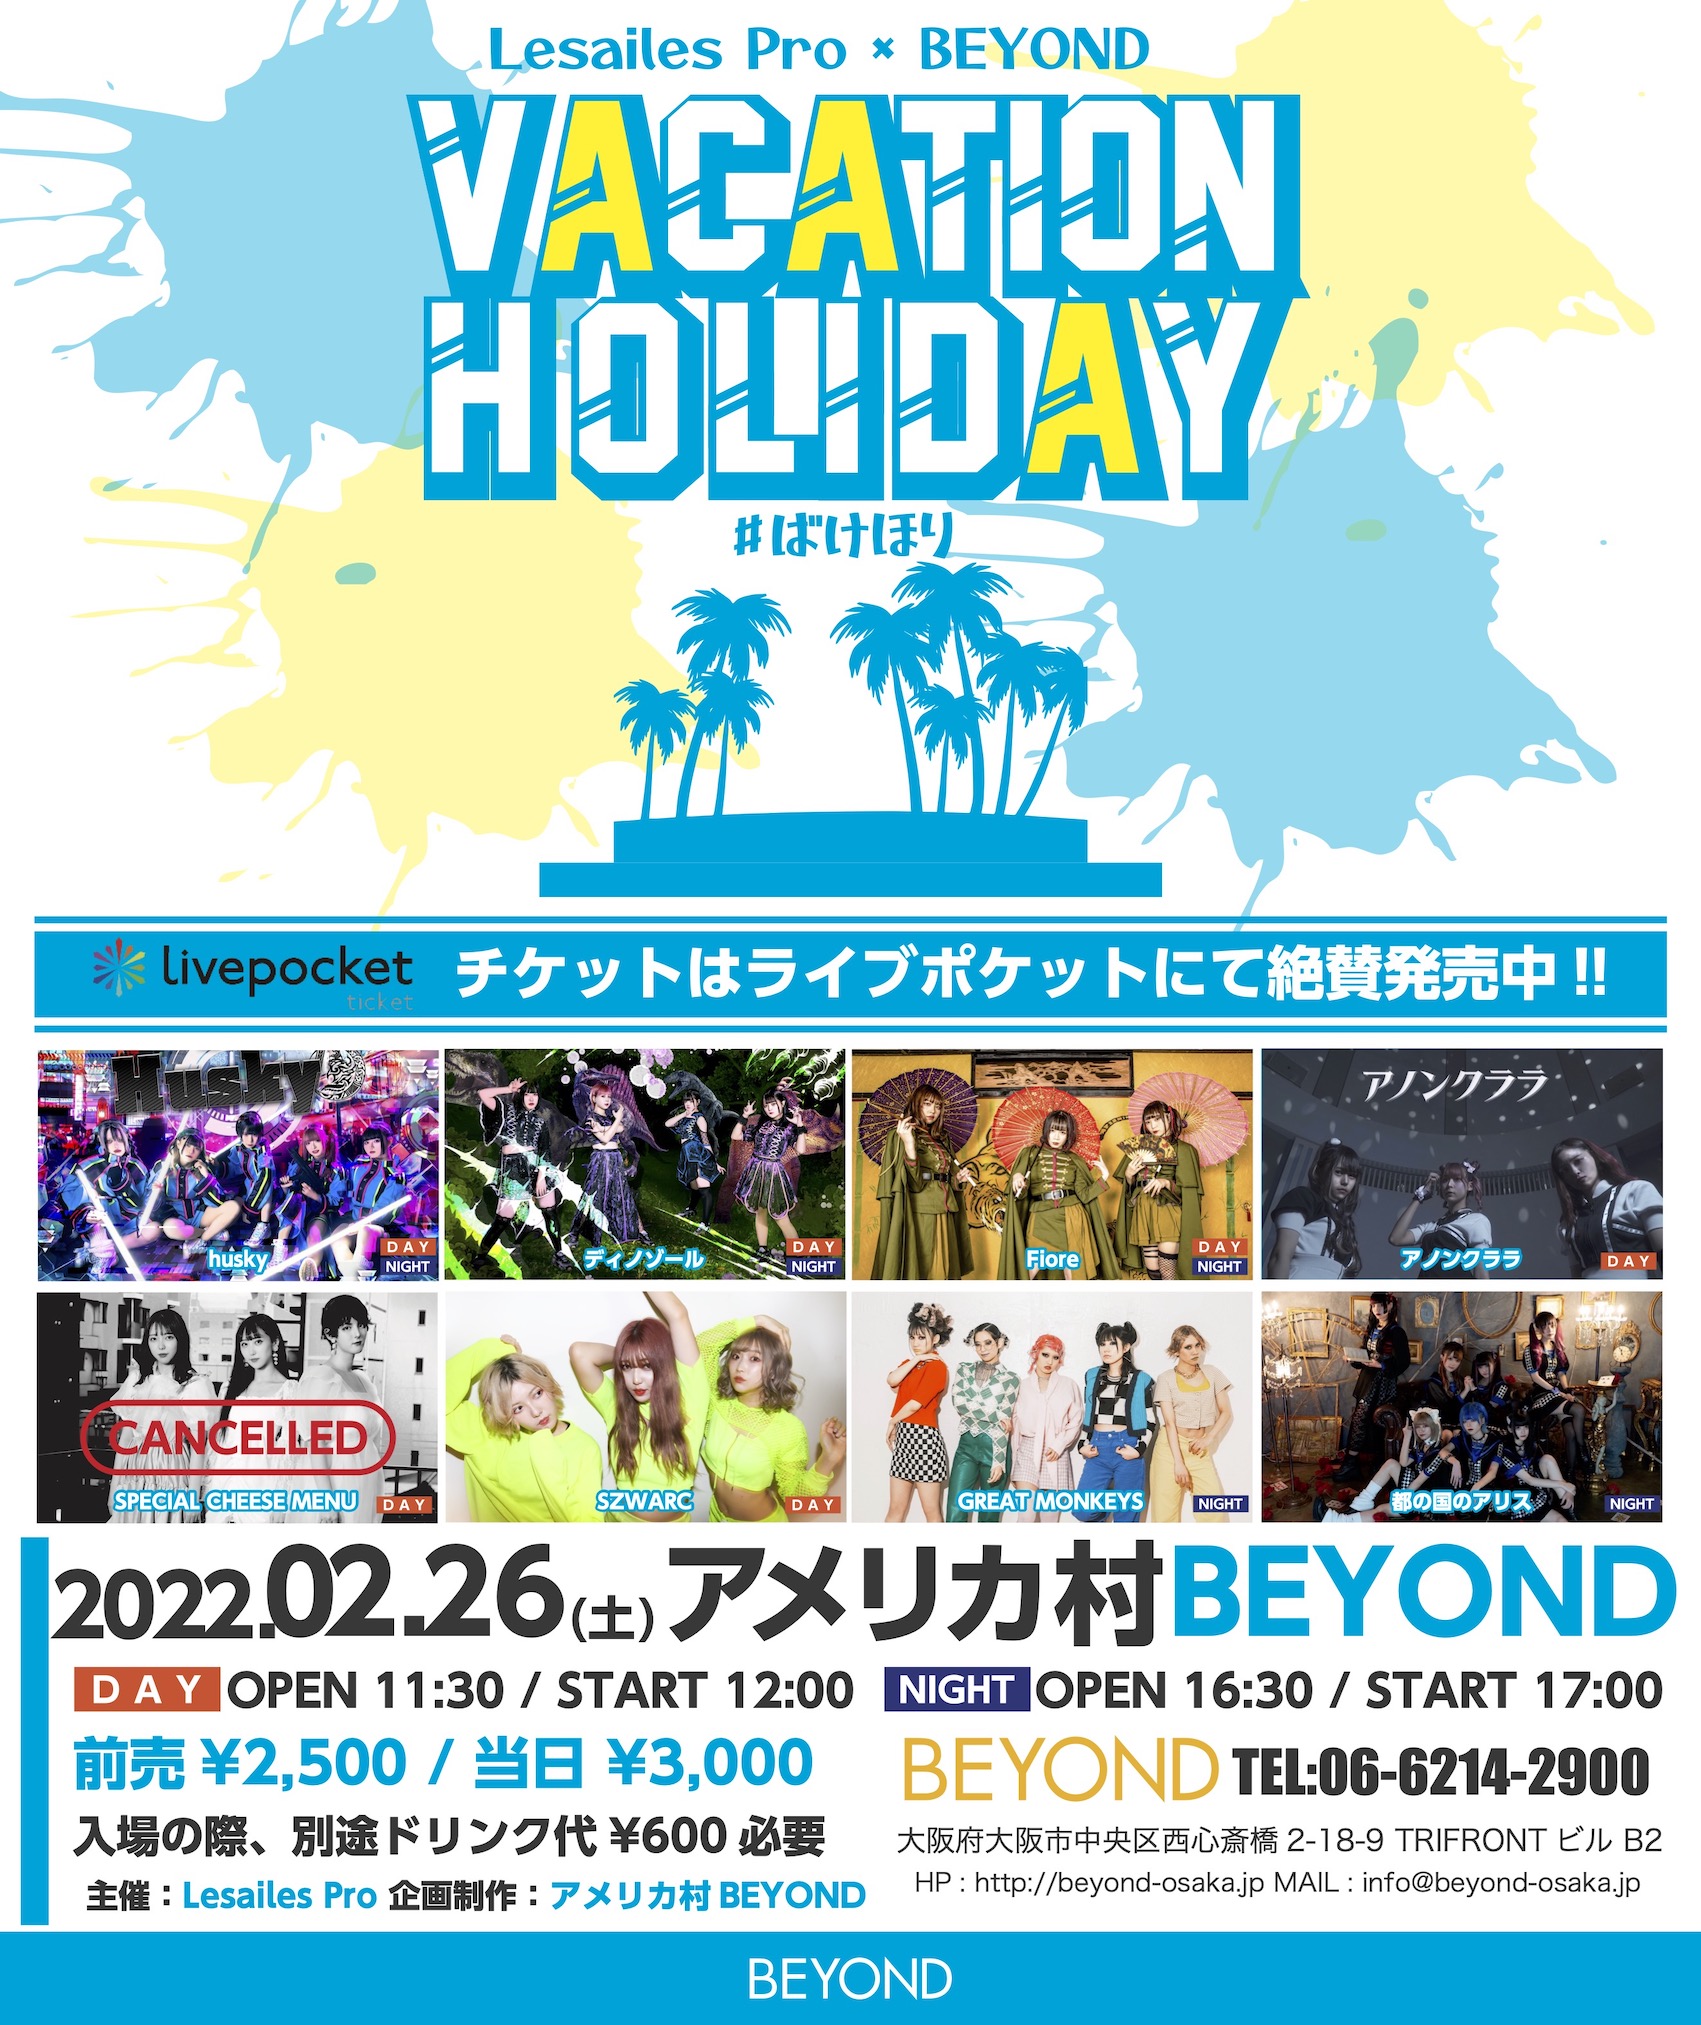 Lesailes Pro × BEYOND Pre. 「VacationHoliday」 -DAY-